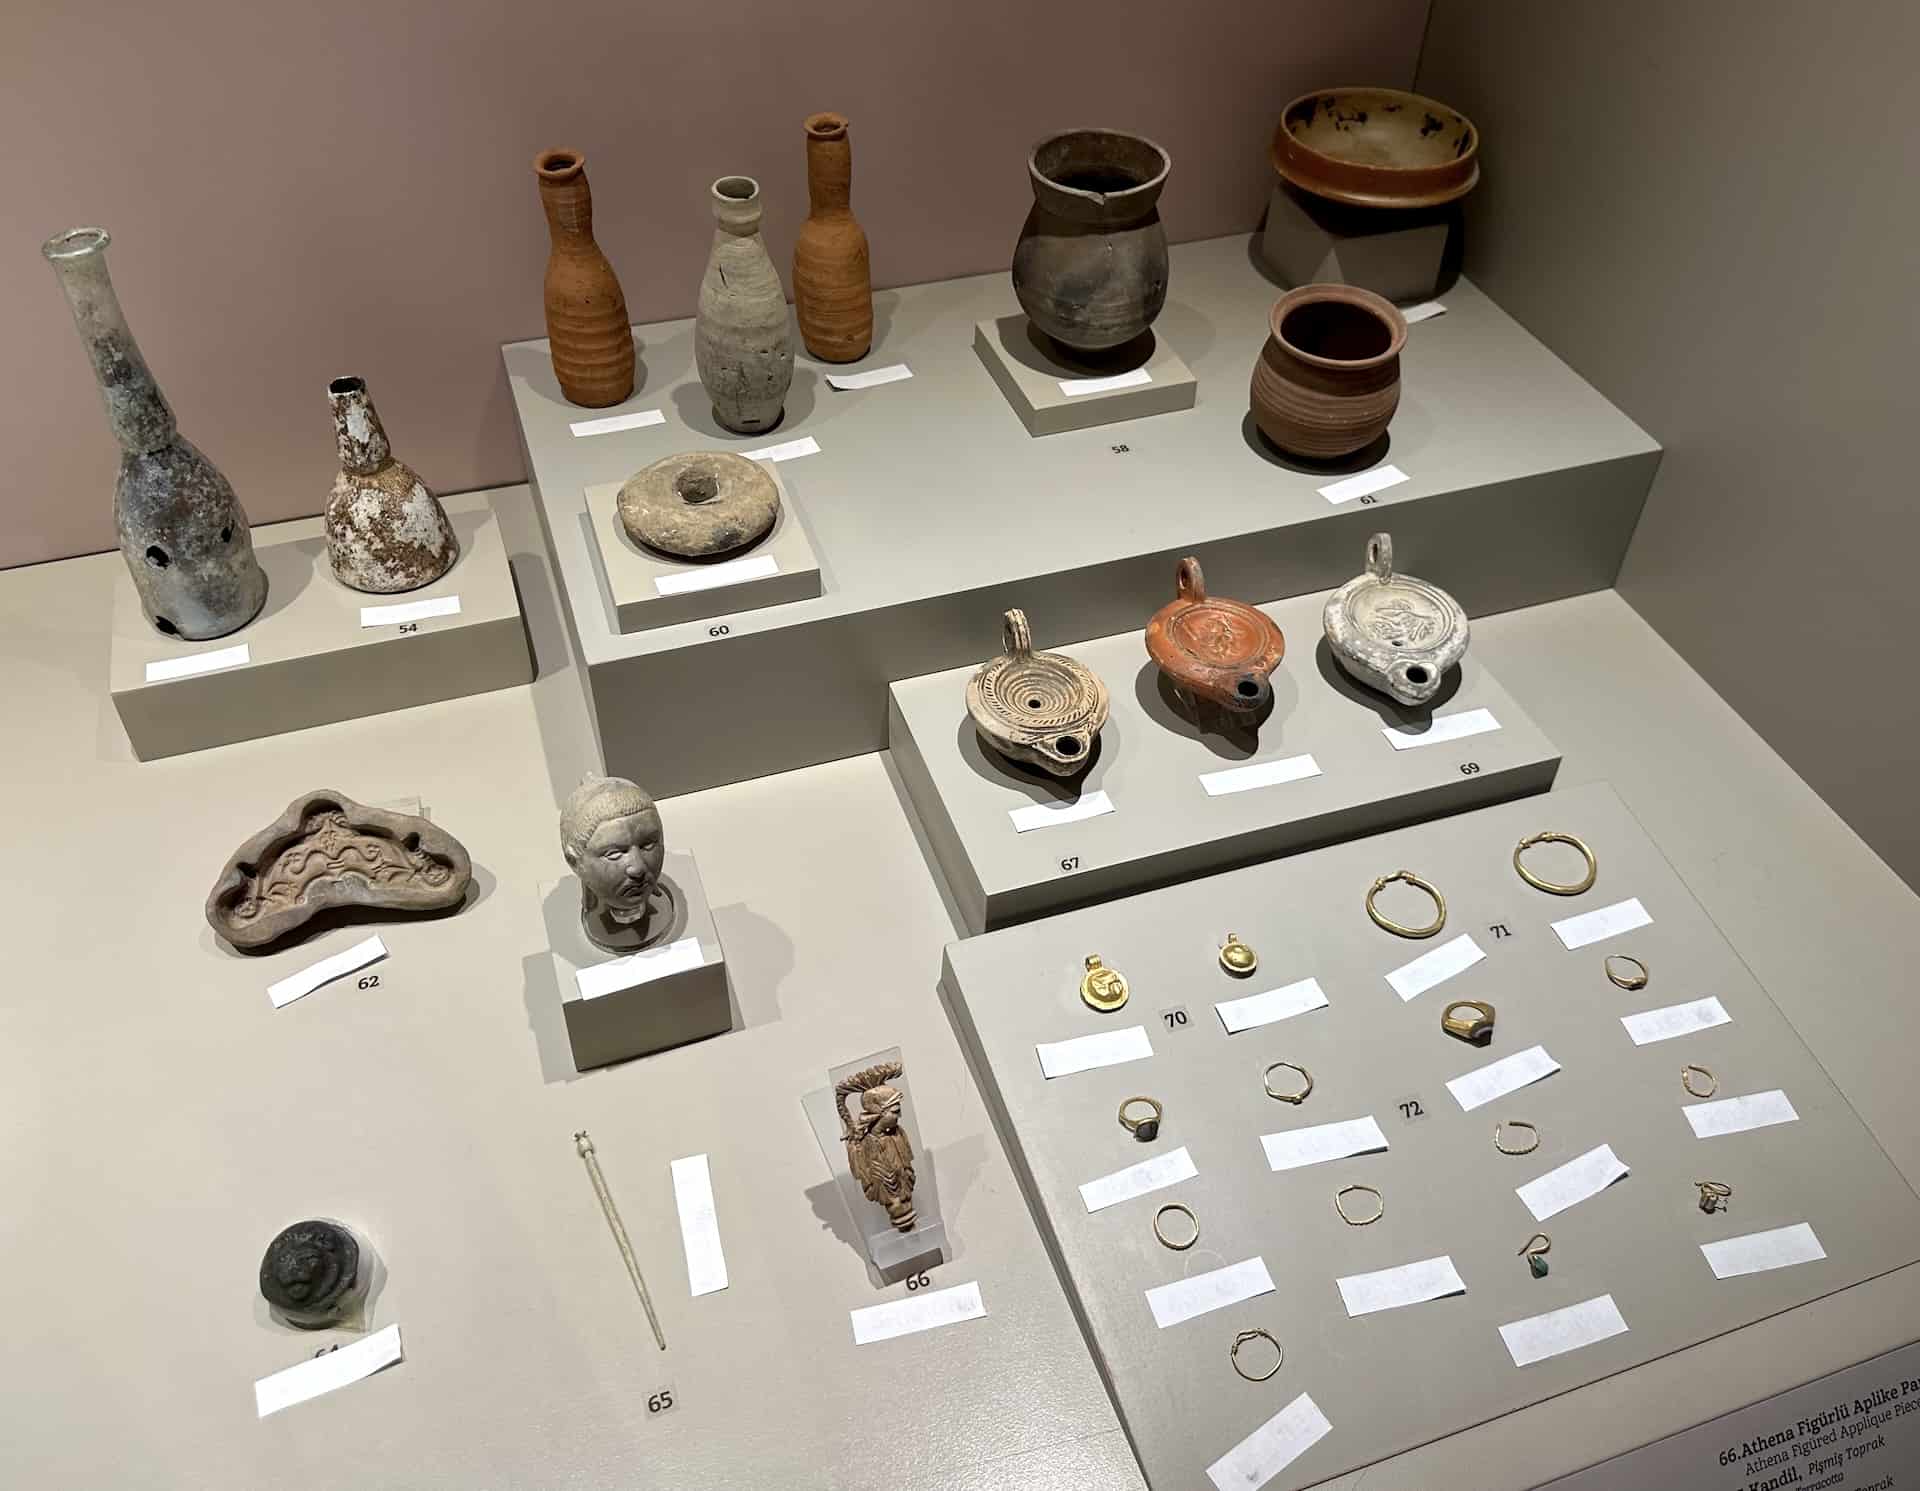 Glass, ceramics, and jewelry (4th century BC to 4th century AD) in Ephesus Through the Ages